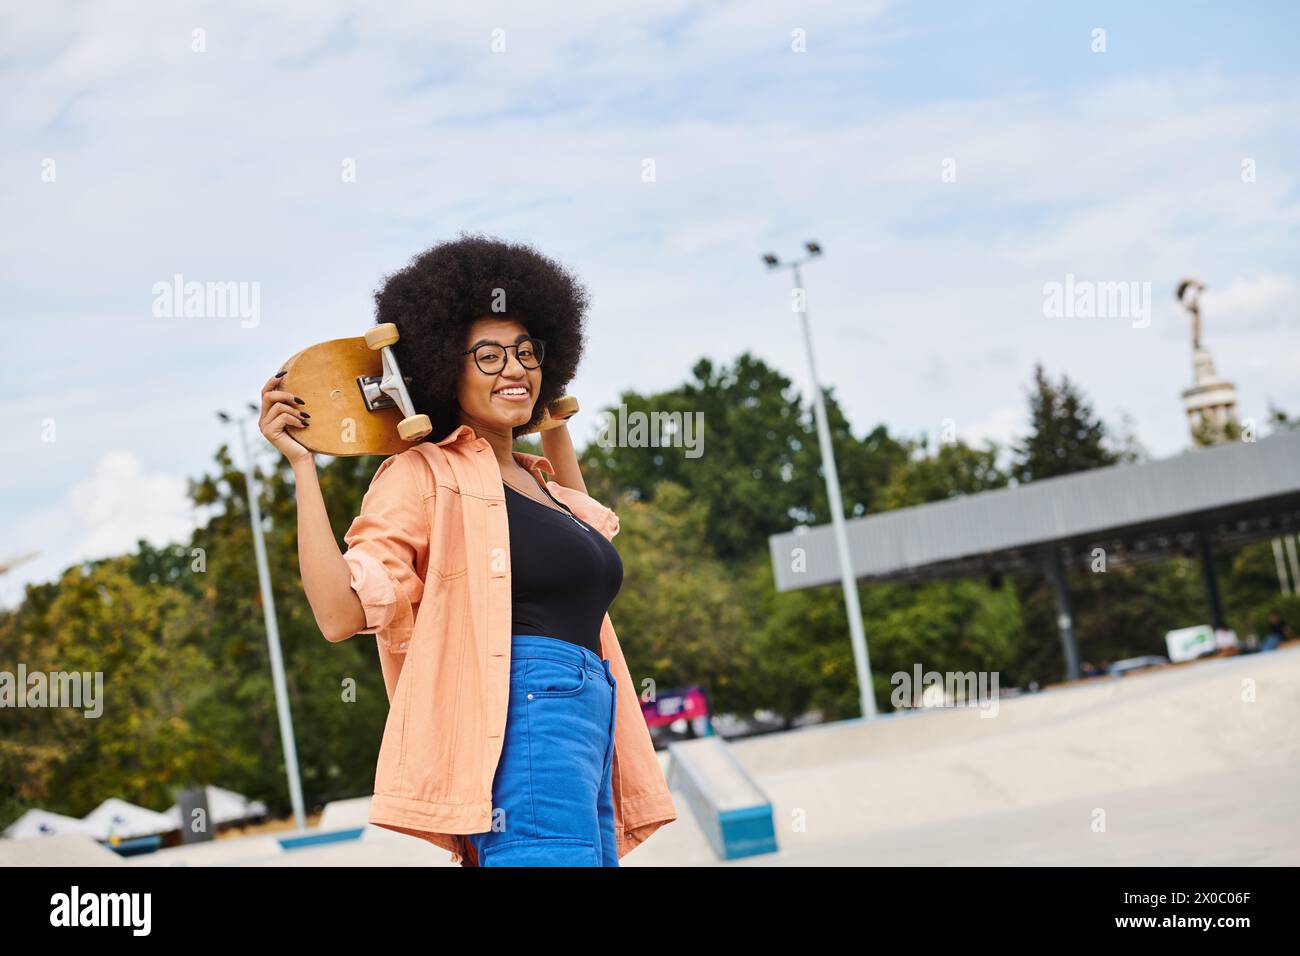 A stylish African American woman with curly hair holds a skateboard in her right hand at a skate park. Stock Photo